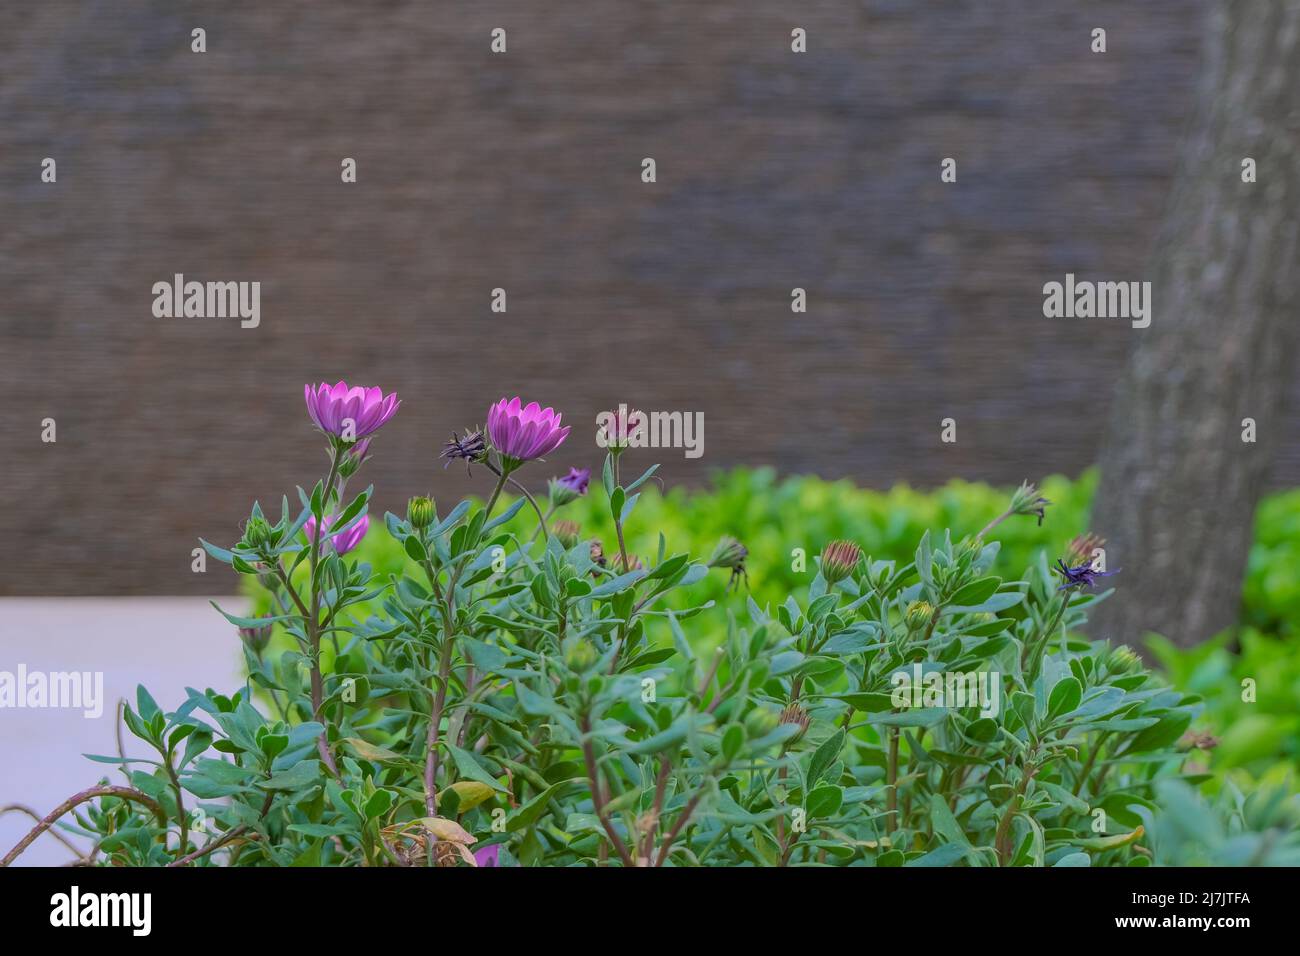 stone plants flowers in season gardening on defocused background with copy space. botany wallpaper Stock Photo